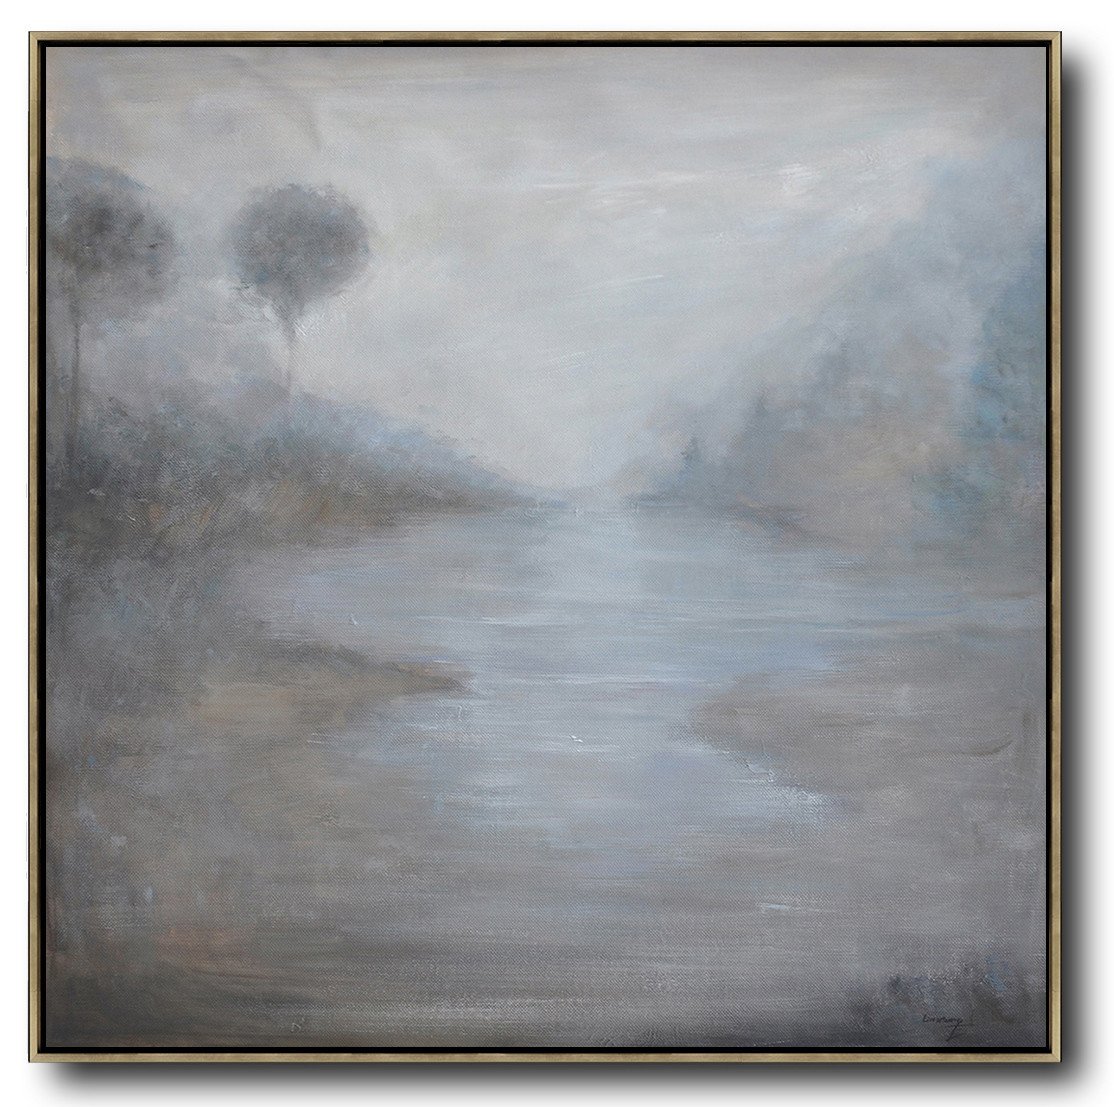 Extra Large Canvas Art,Abstract Landscape Oil Painting,Canvas Wall Art,Grey,White,Black.etc